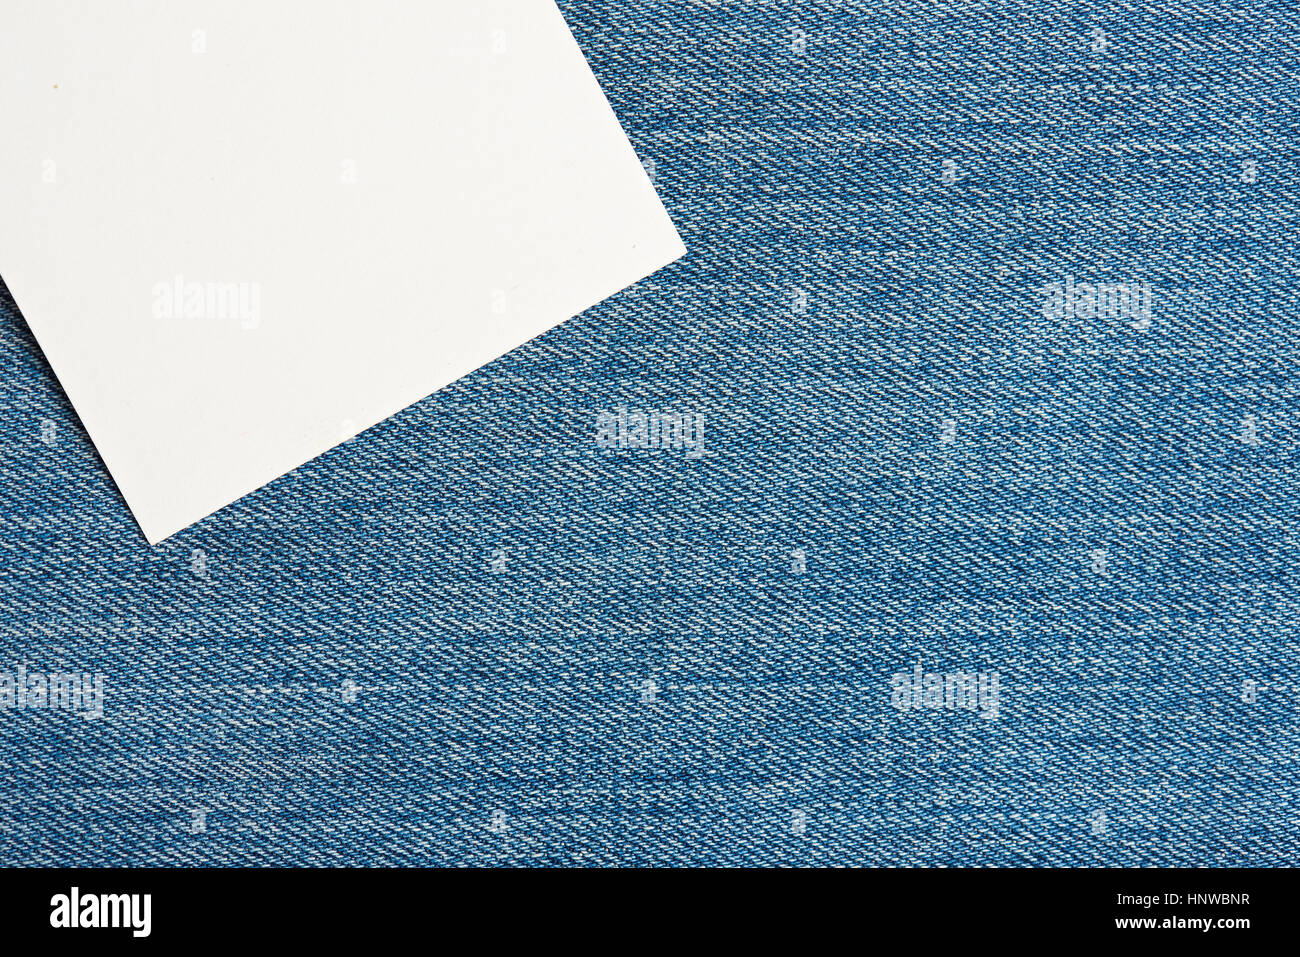 White tag on light blue jeans textile texture surface  background Stock Photo